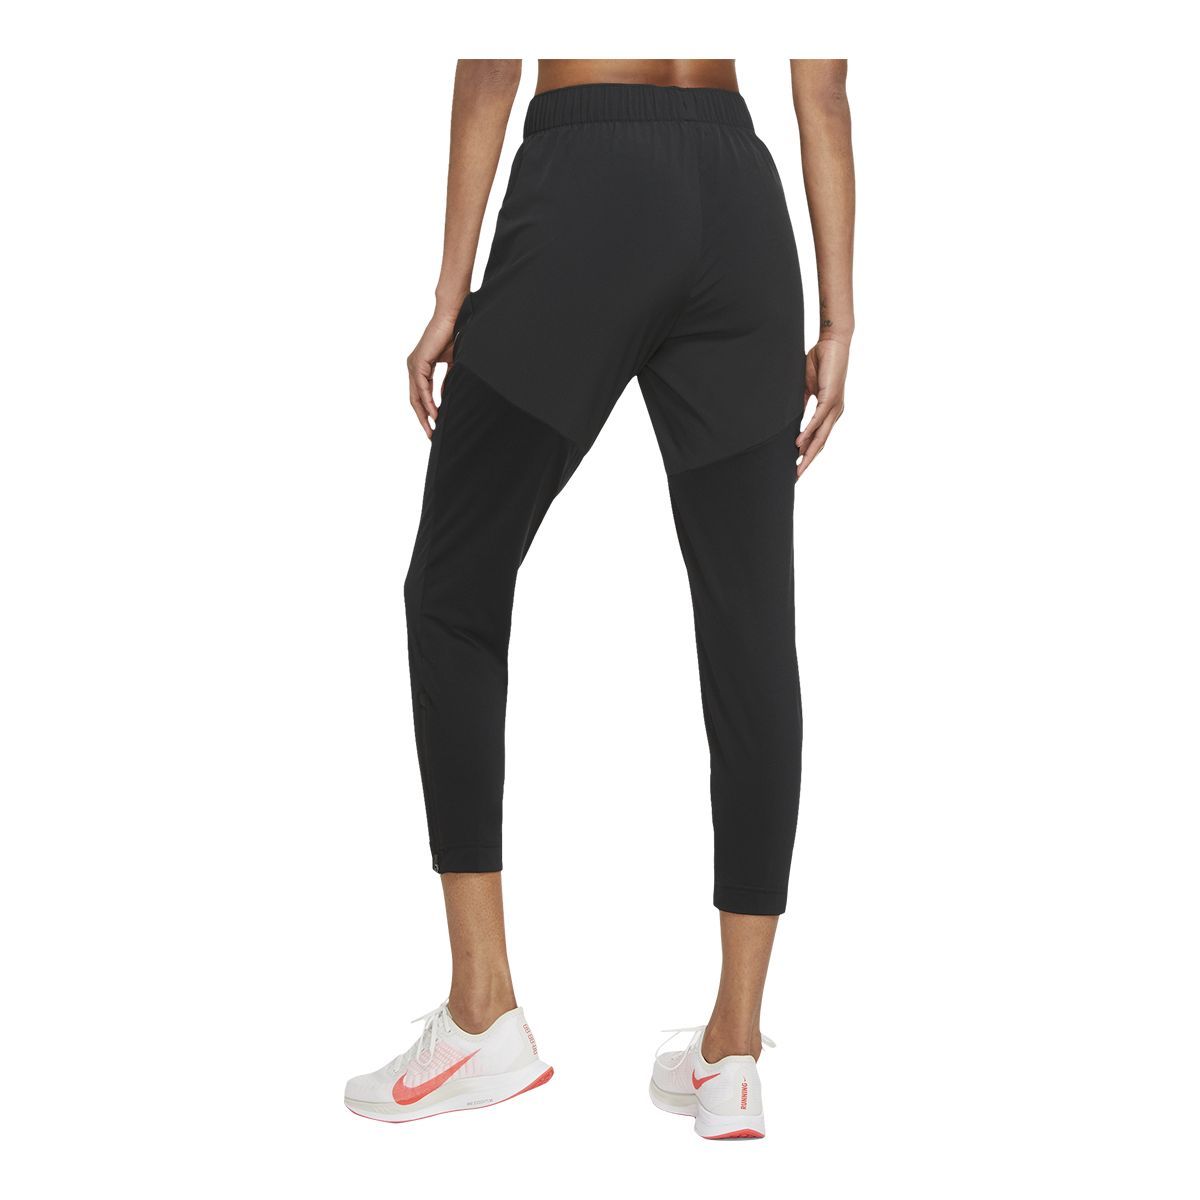 XXL Nike Women's Joggers Pant Training Sport Athletic Workout Active Wear  Midrise